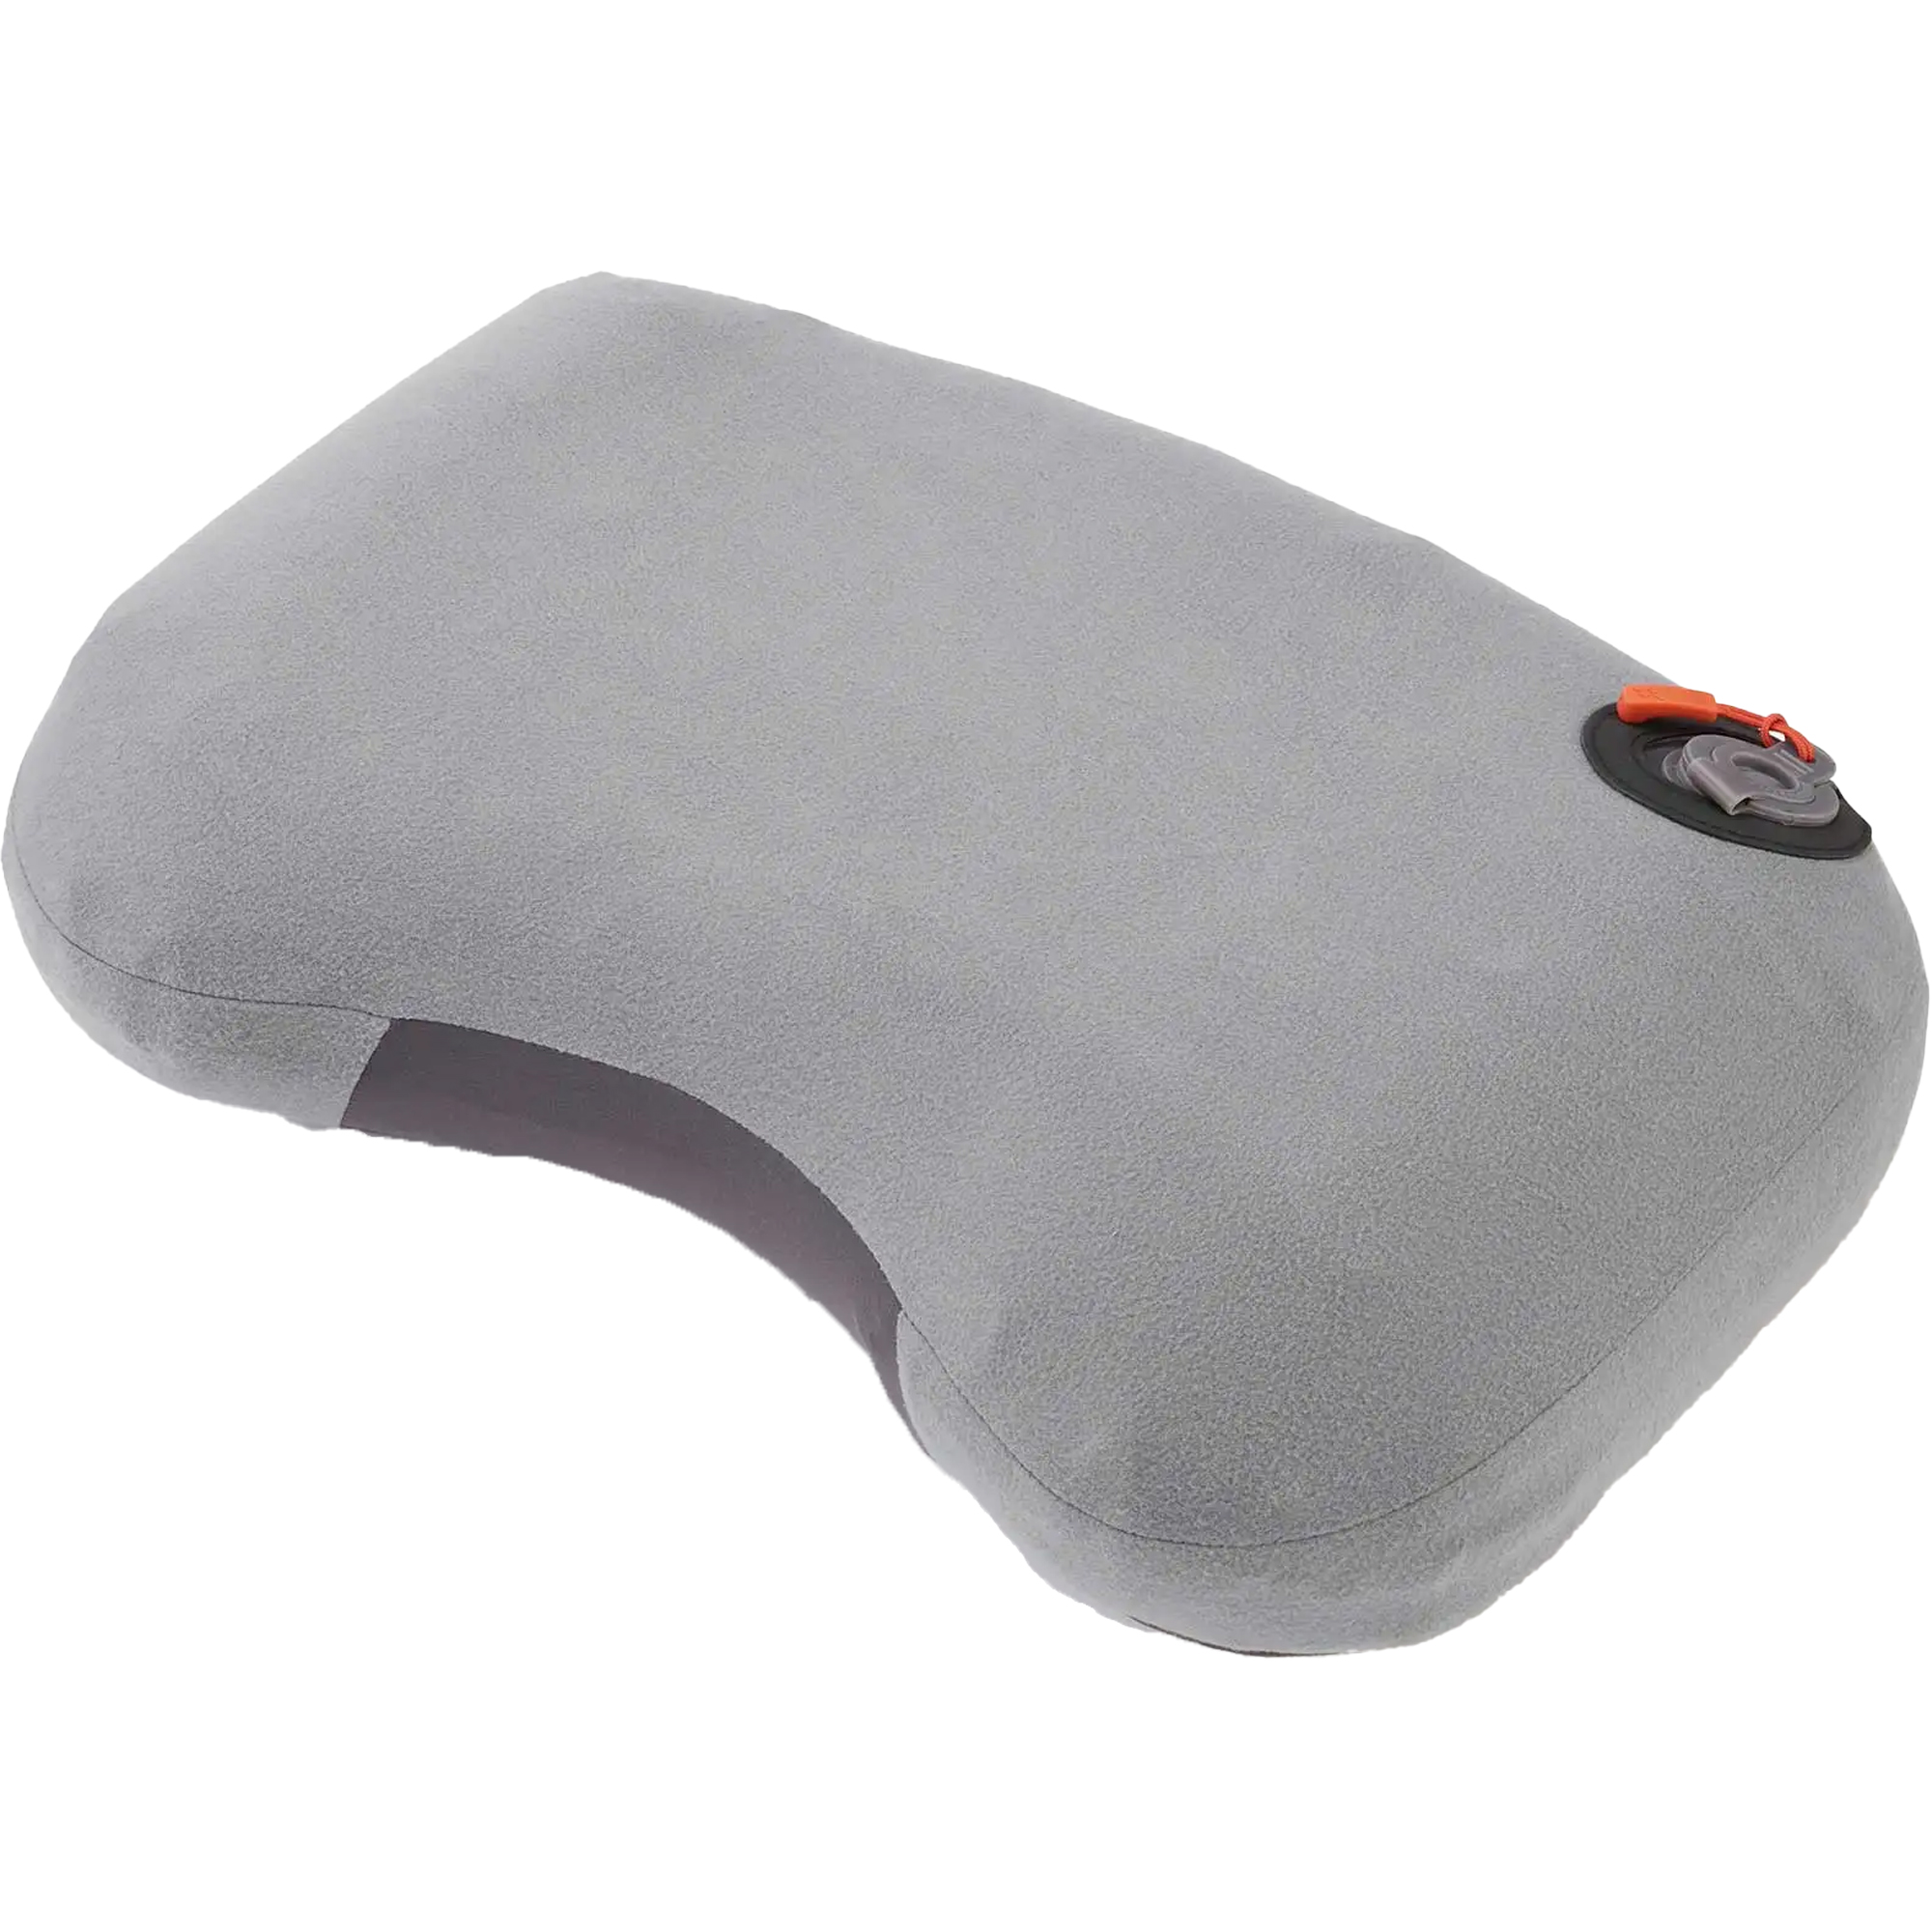 Rab Stratosphere Inflatable Camping Pillow